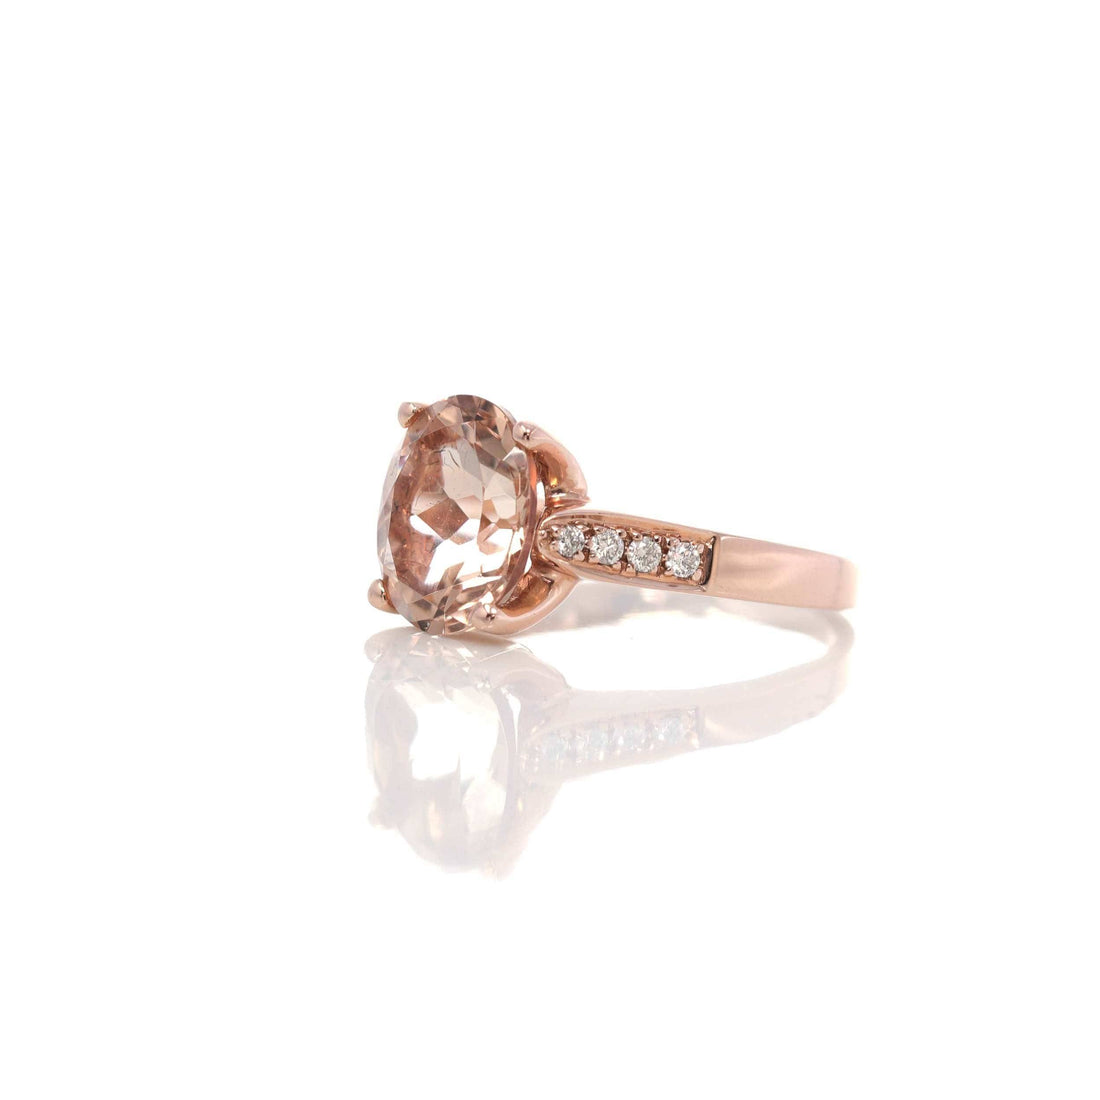 Baikalla Jewelry Gold Amethyst Ring 5 14k Rose Gold Natural Champagne Morganite Ring with Diamonds